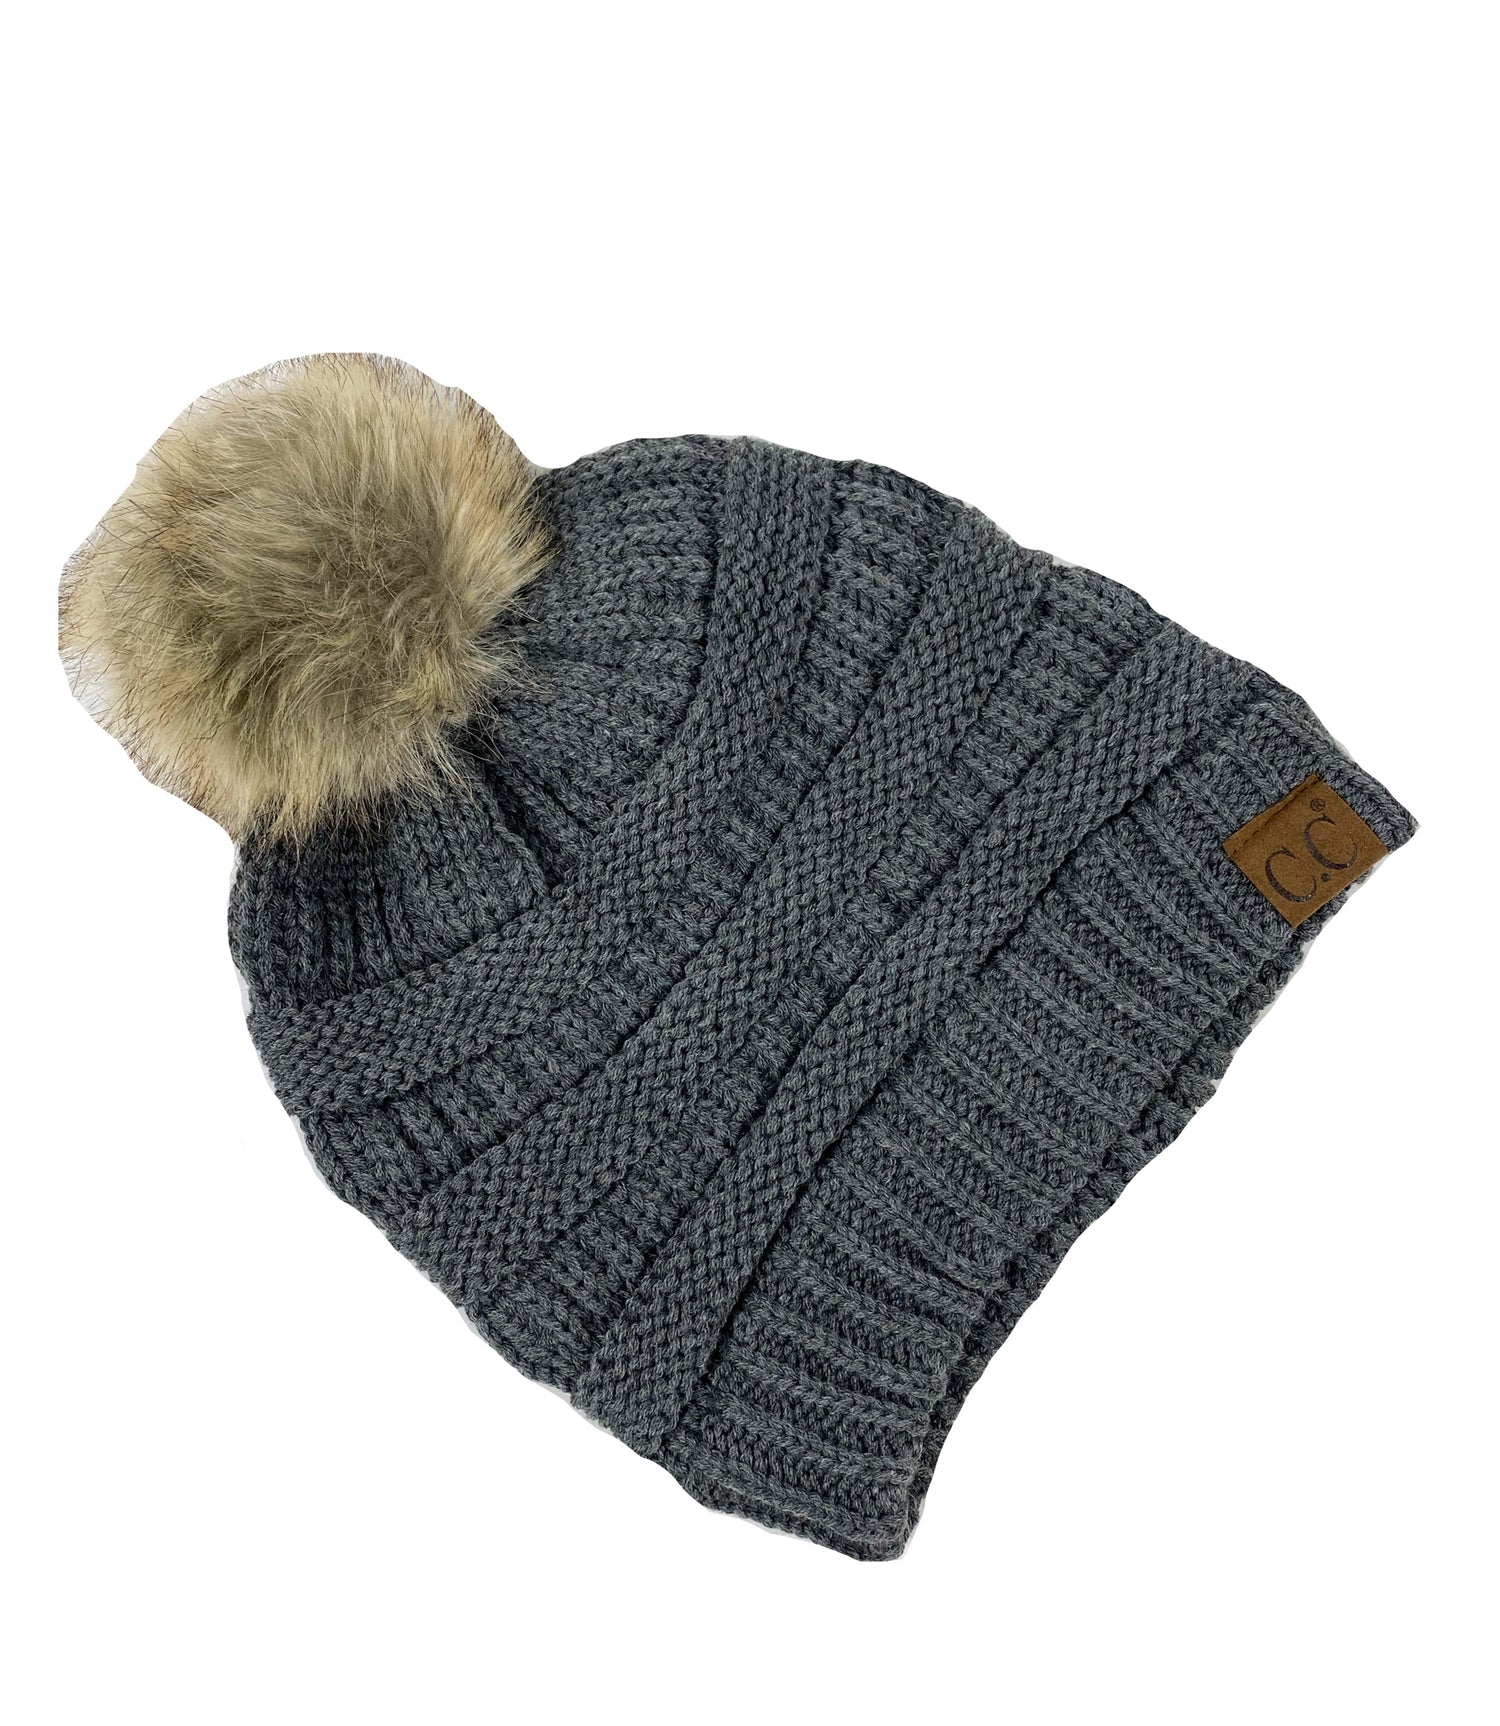 C.C Classic Beanies for Adults, Winter Hats, Winter Beanies, Premium Hats, Warm Hats, Winter Accessories, CC Beanies. One size fits all. Authentic C.C Hat 100% Acrylic. Faux Fur Pom-Pom .